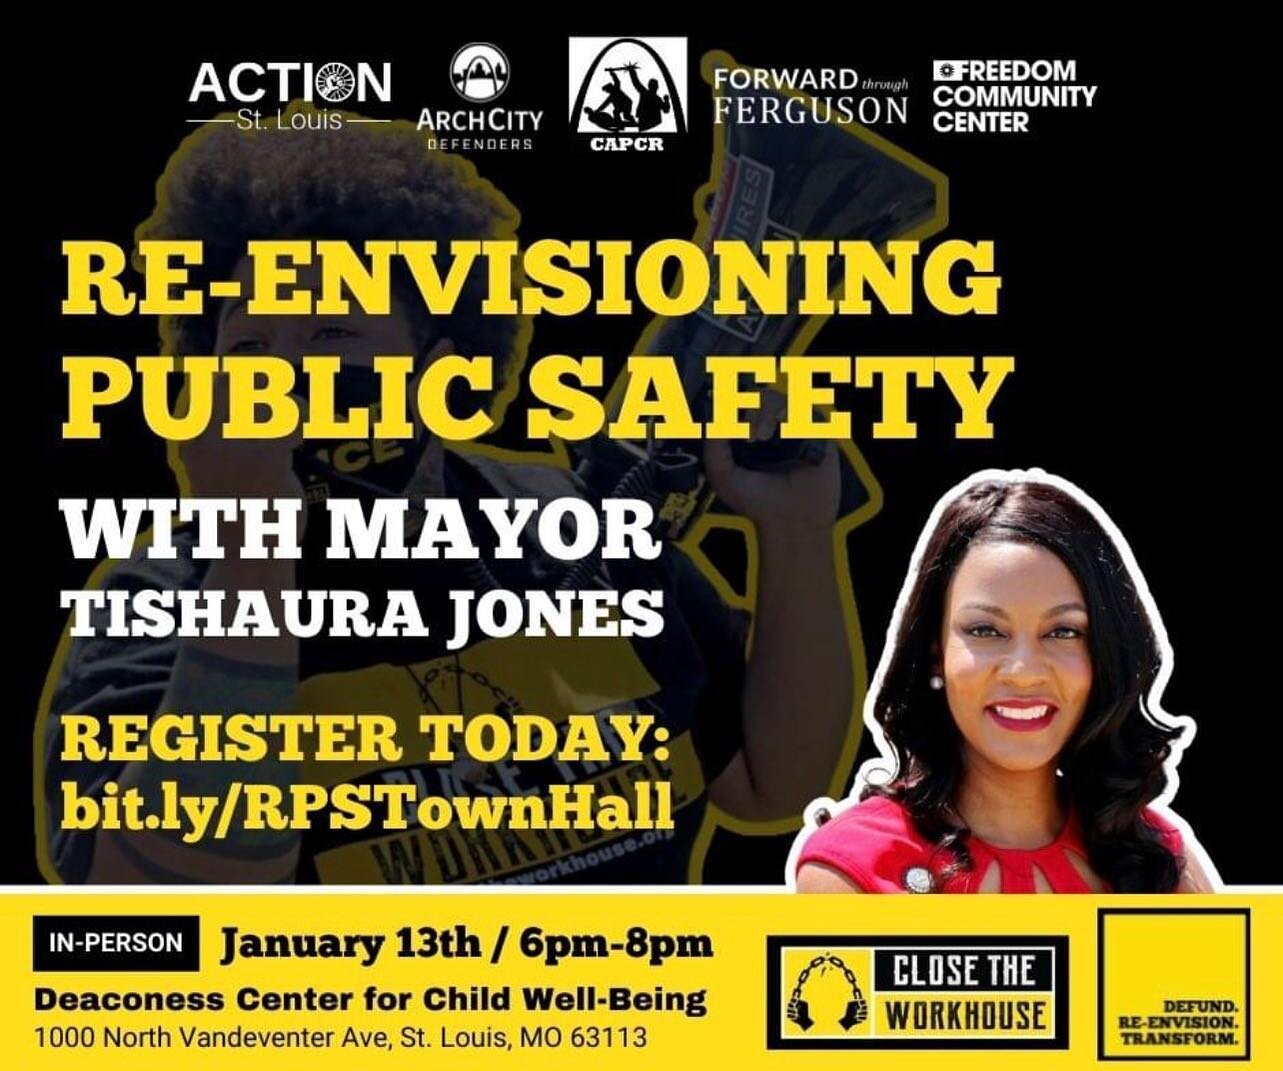 Join Close the Workhouse and Defund. Re-envision. Transform campaigns on January 13th from 6-8pm for a Re-envisioning Public Safety TownHall with Mayor Tishaura Jones at the Deaconess Center( 1000 N. Vandeventer). Register here: bit.ly/RPSTownHall